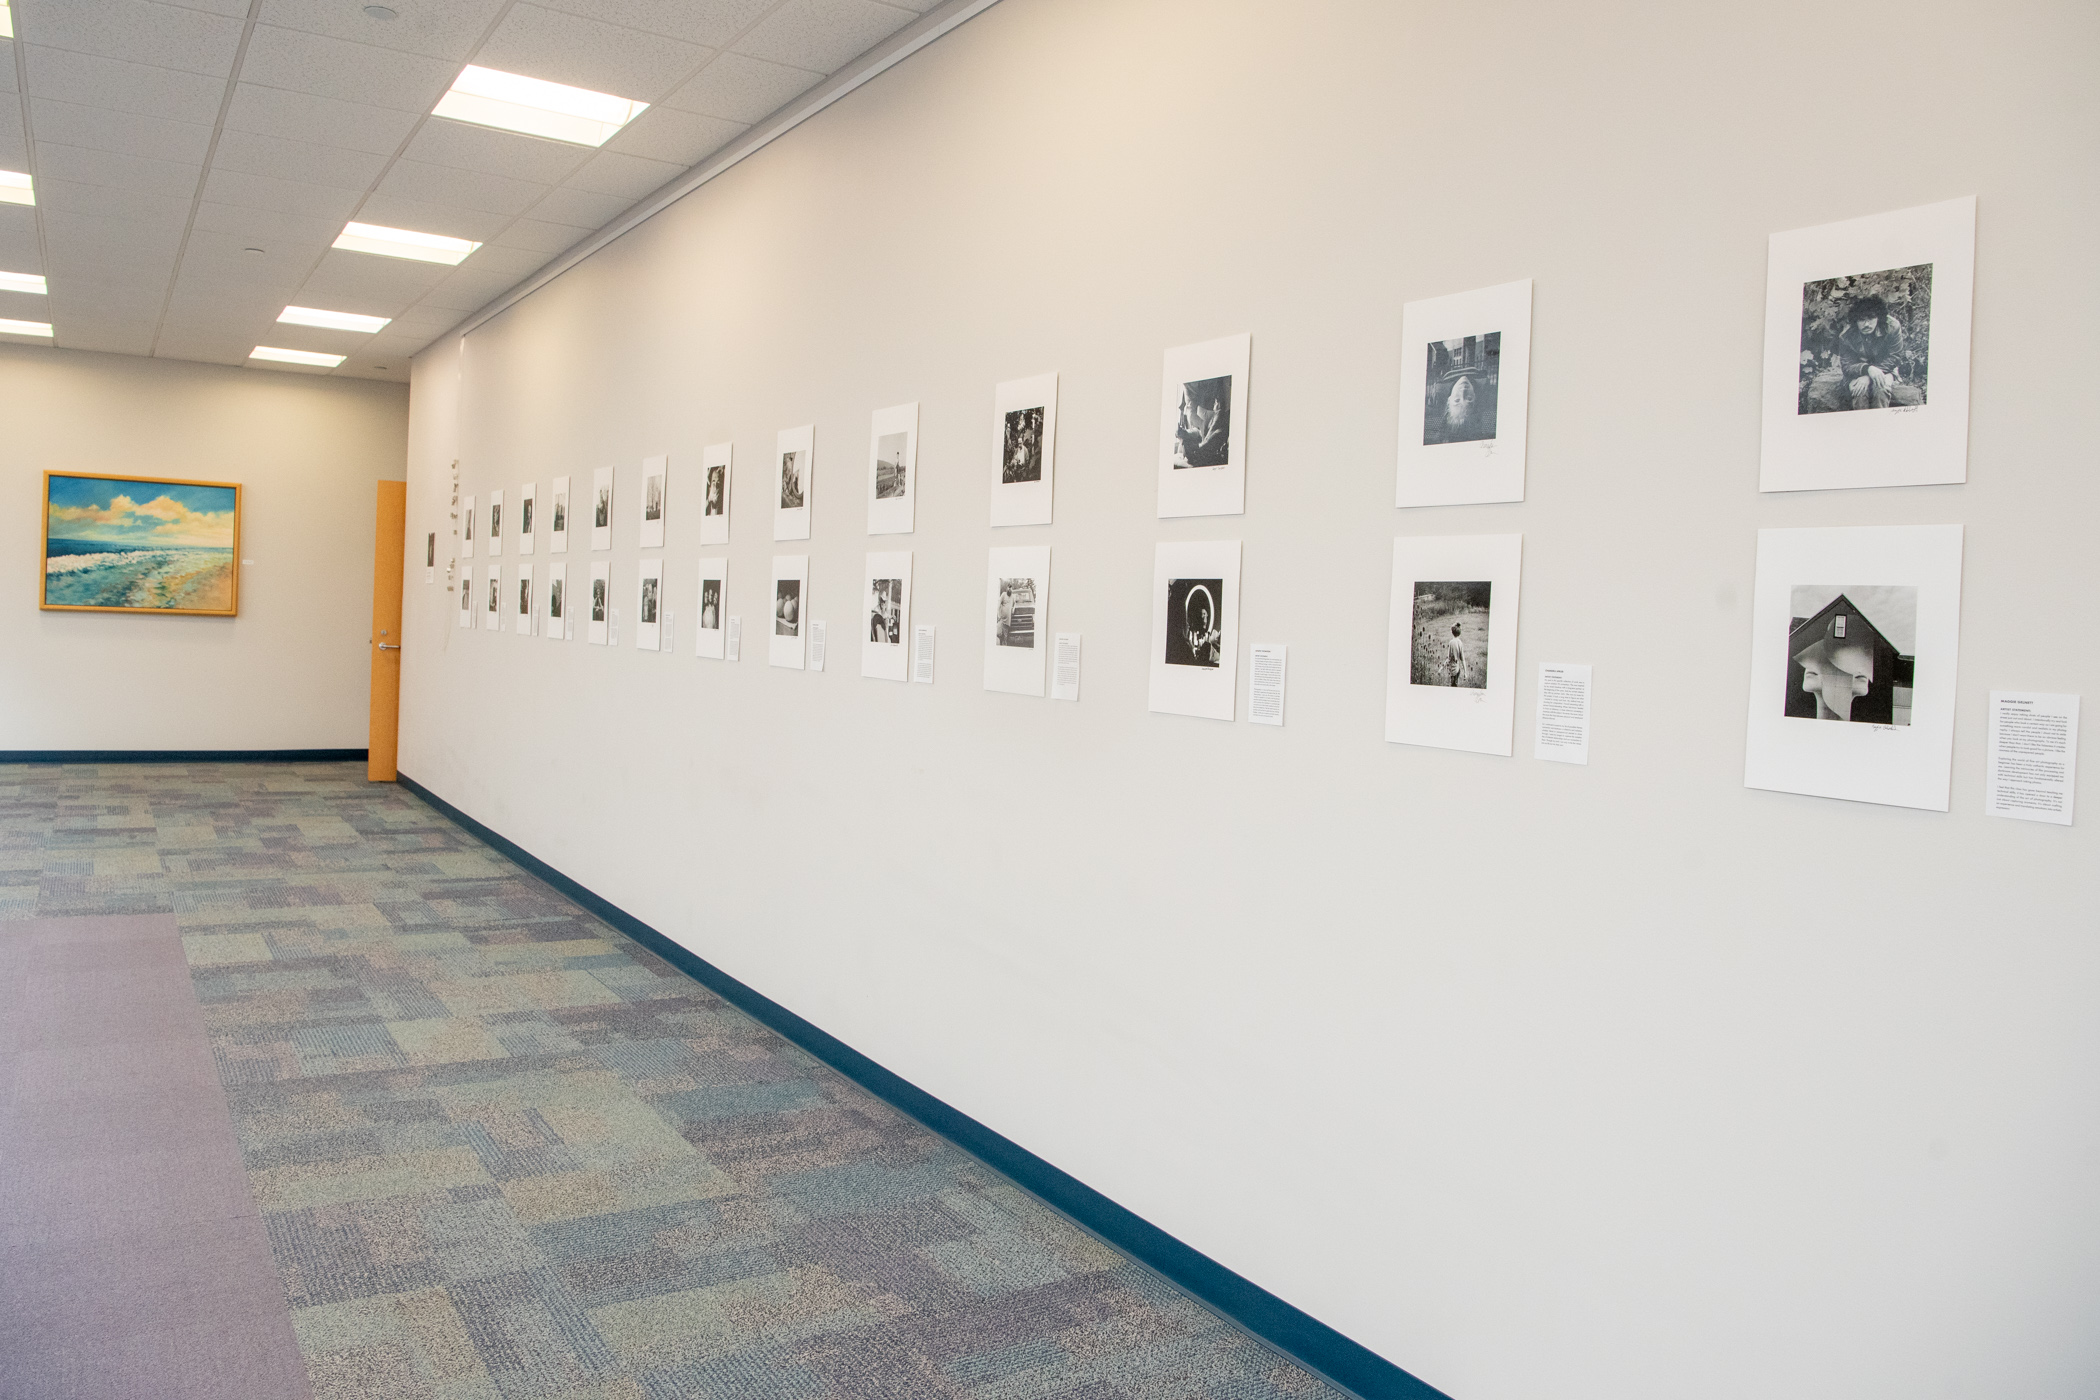 Inspiring images invite viewing on library's second floor